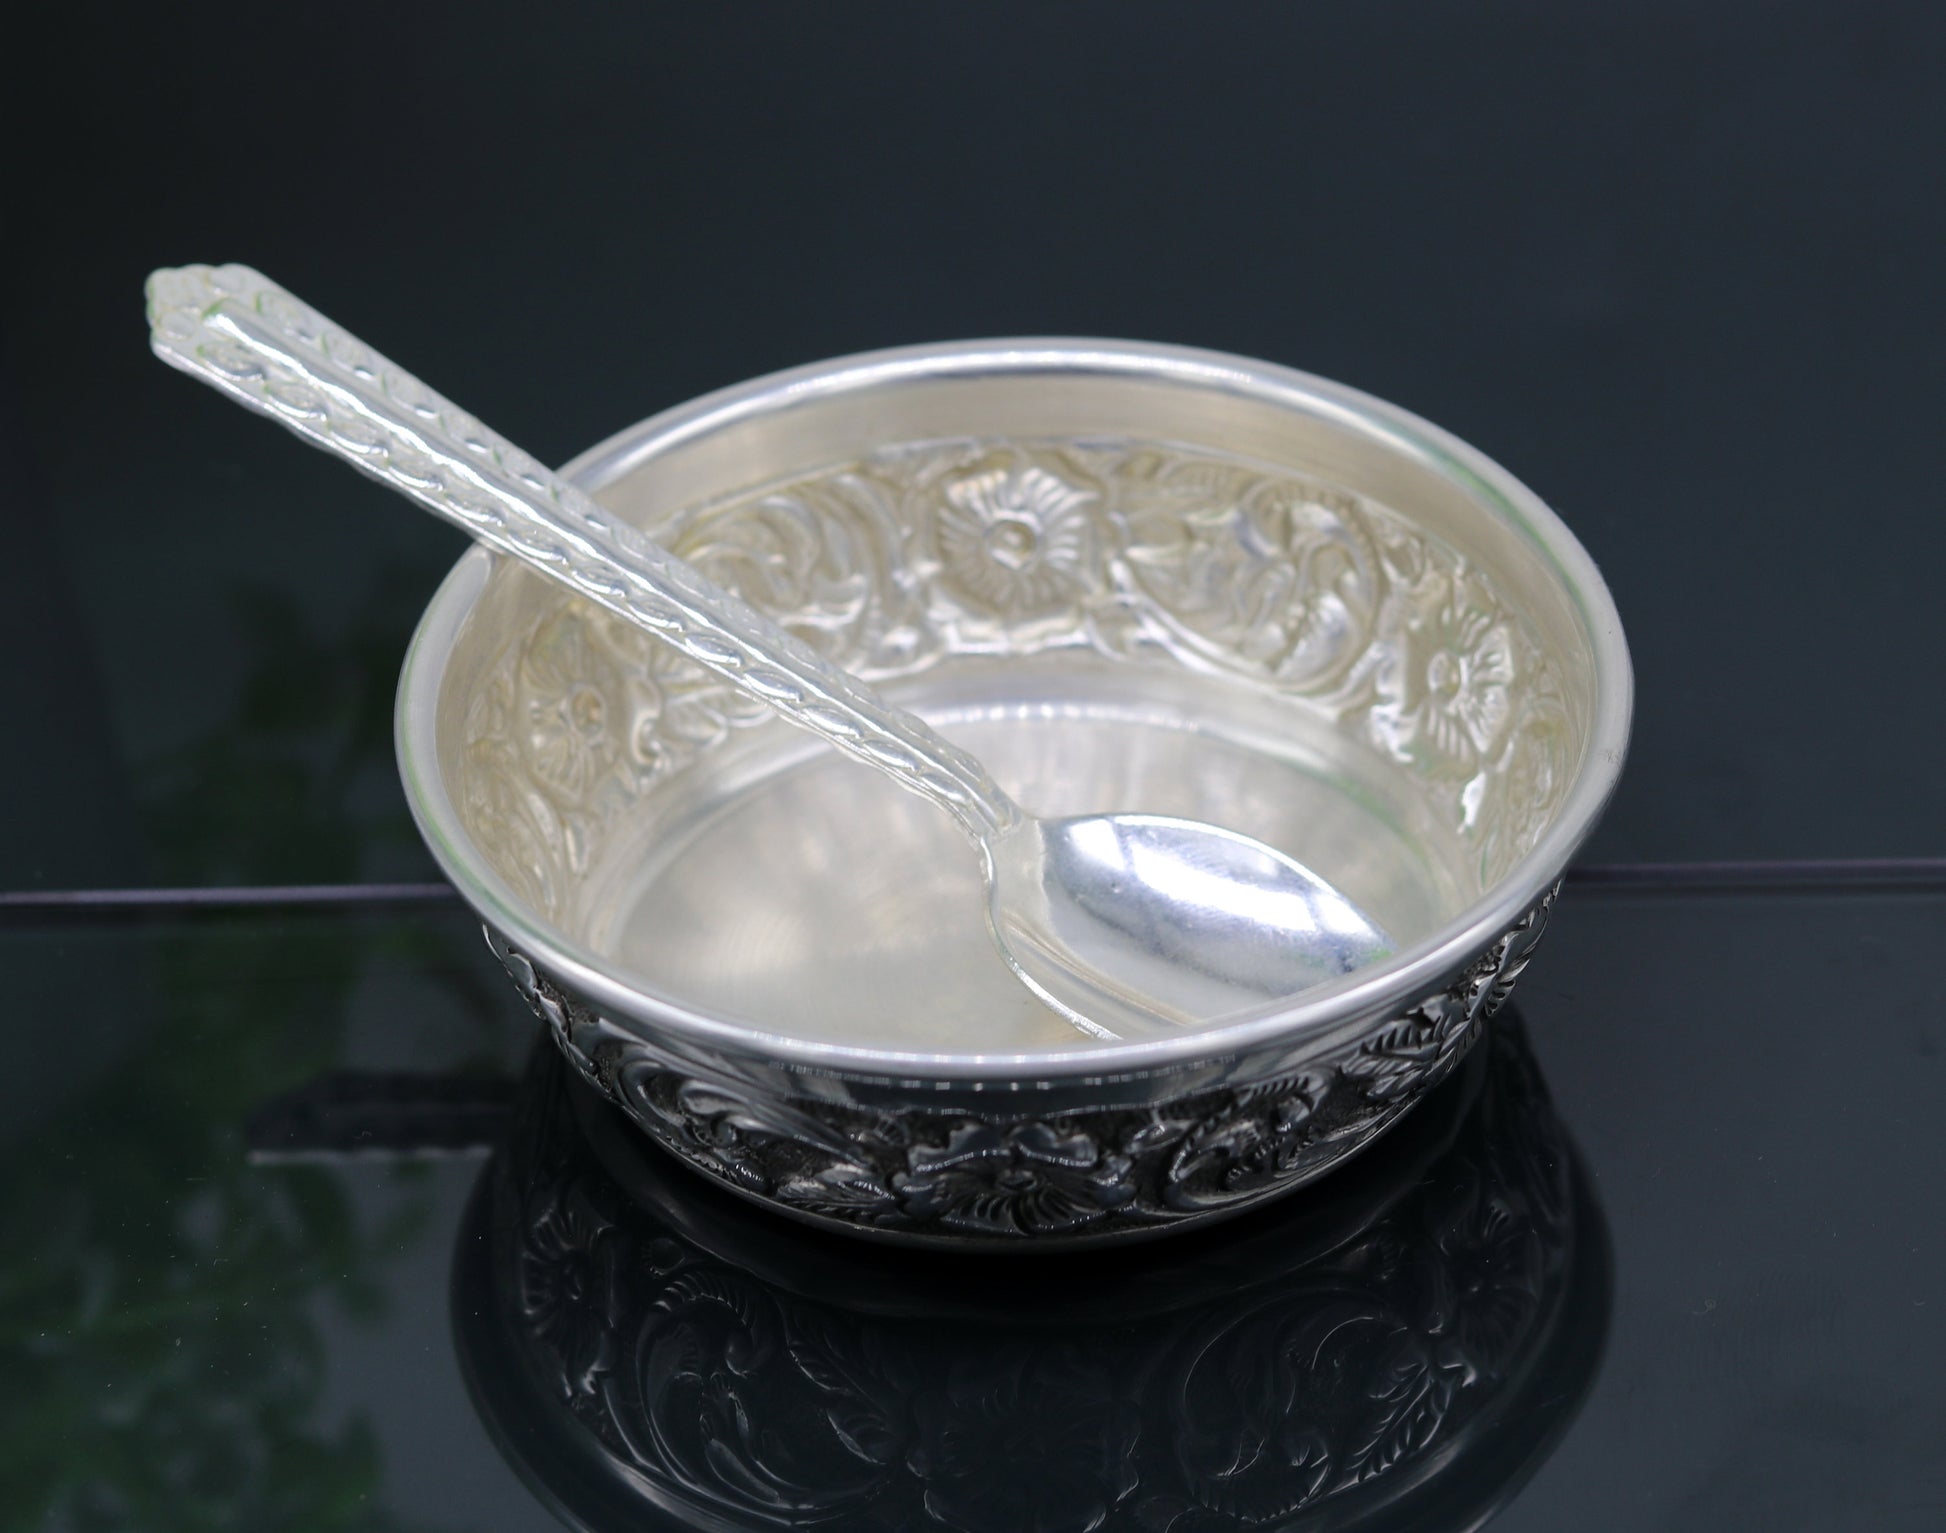 925 sterling silver handcrafted work solid silver bowl and spoon, silver has antibacterial properties, stay healthy, silver vessels sv74 - TRIBAL ORNAMENTS